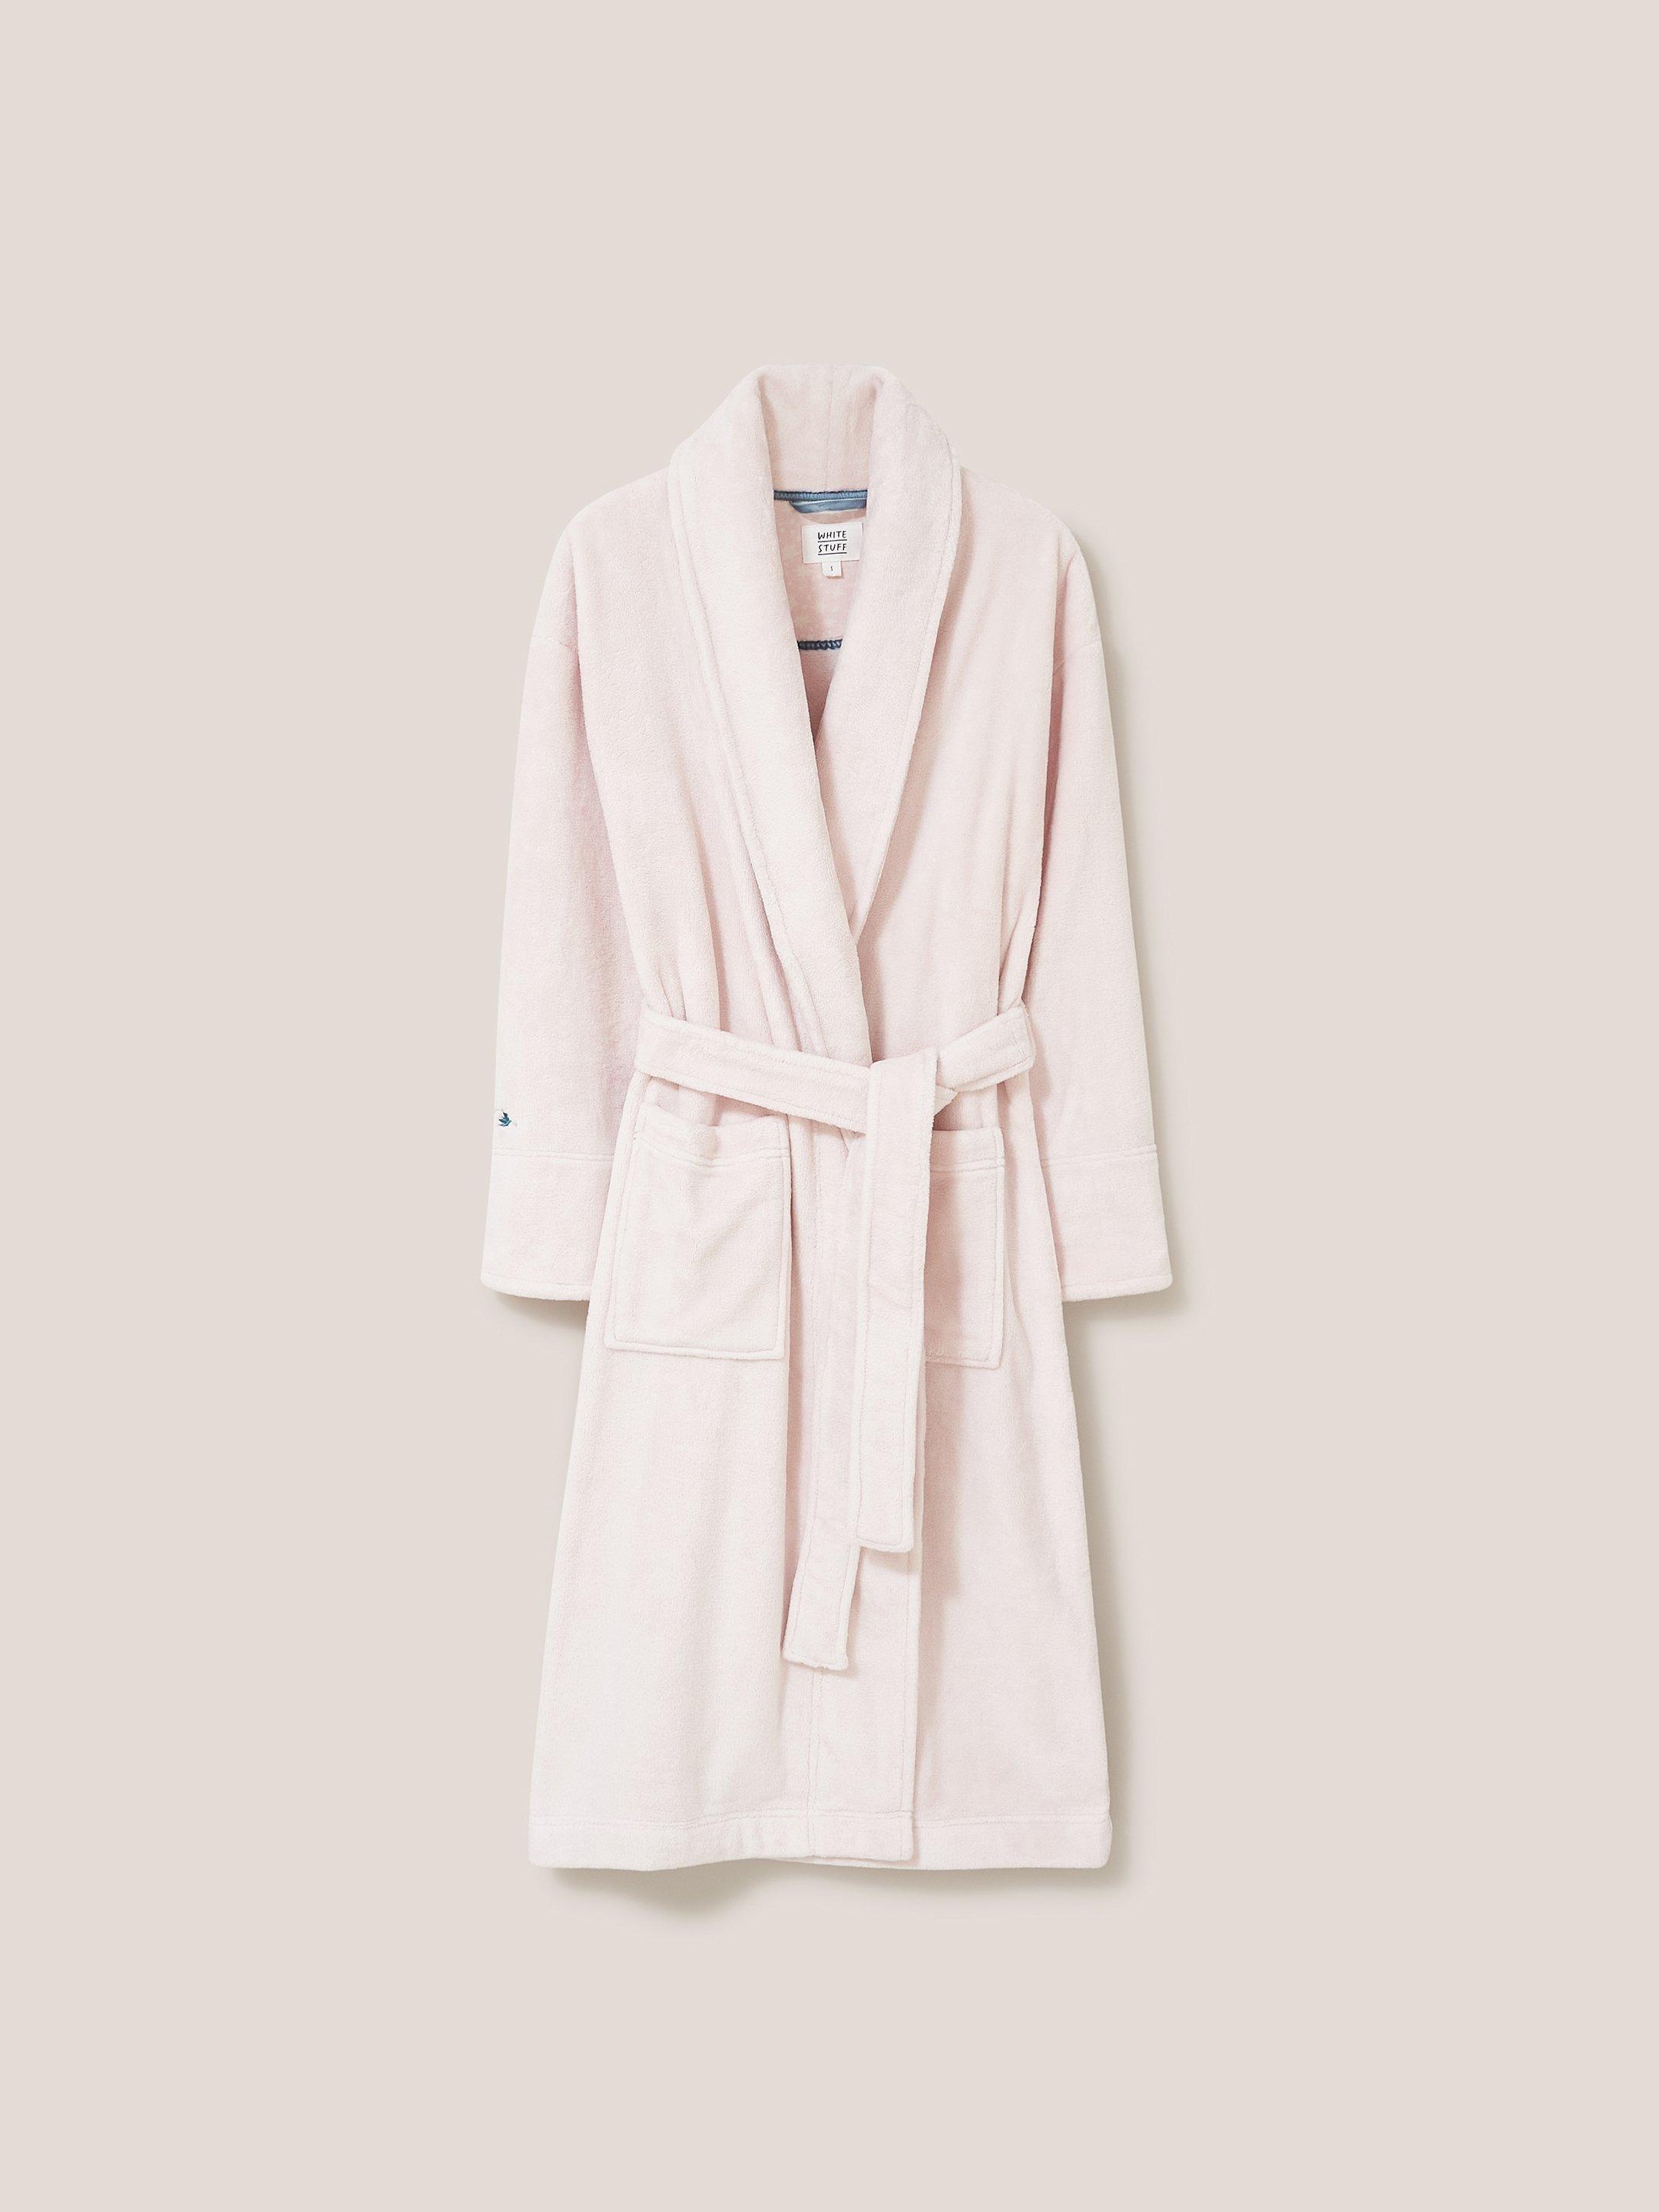 Clover Cosy Dressing Gown in LGT PINK - FLAT FRONT